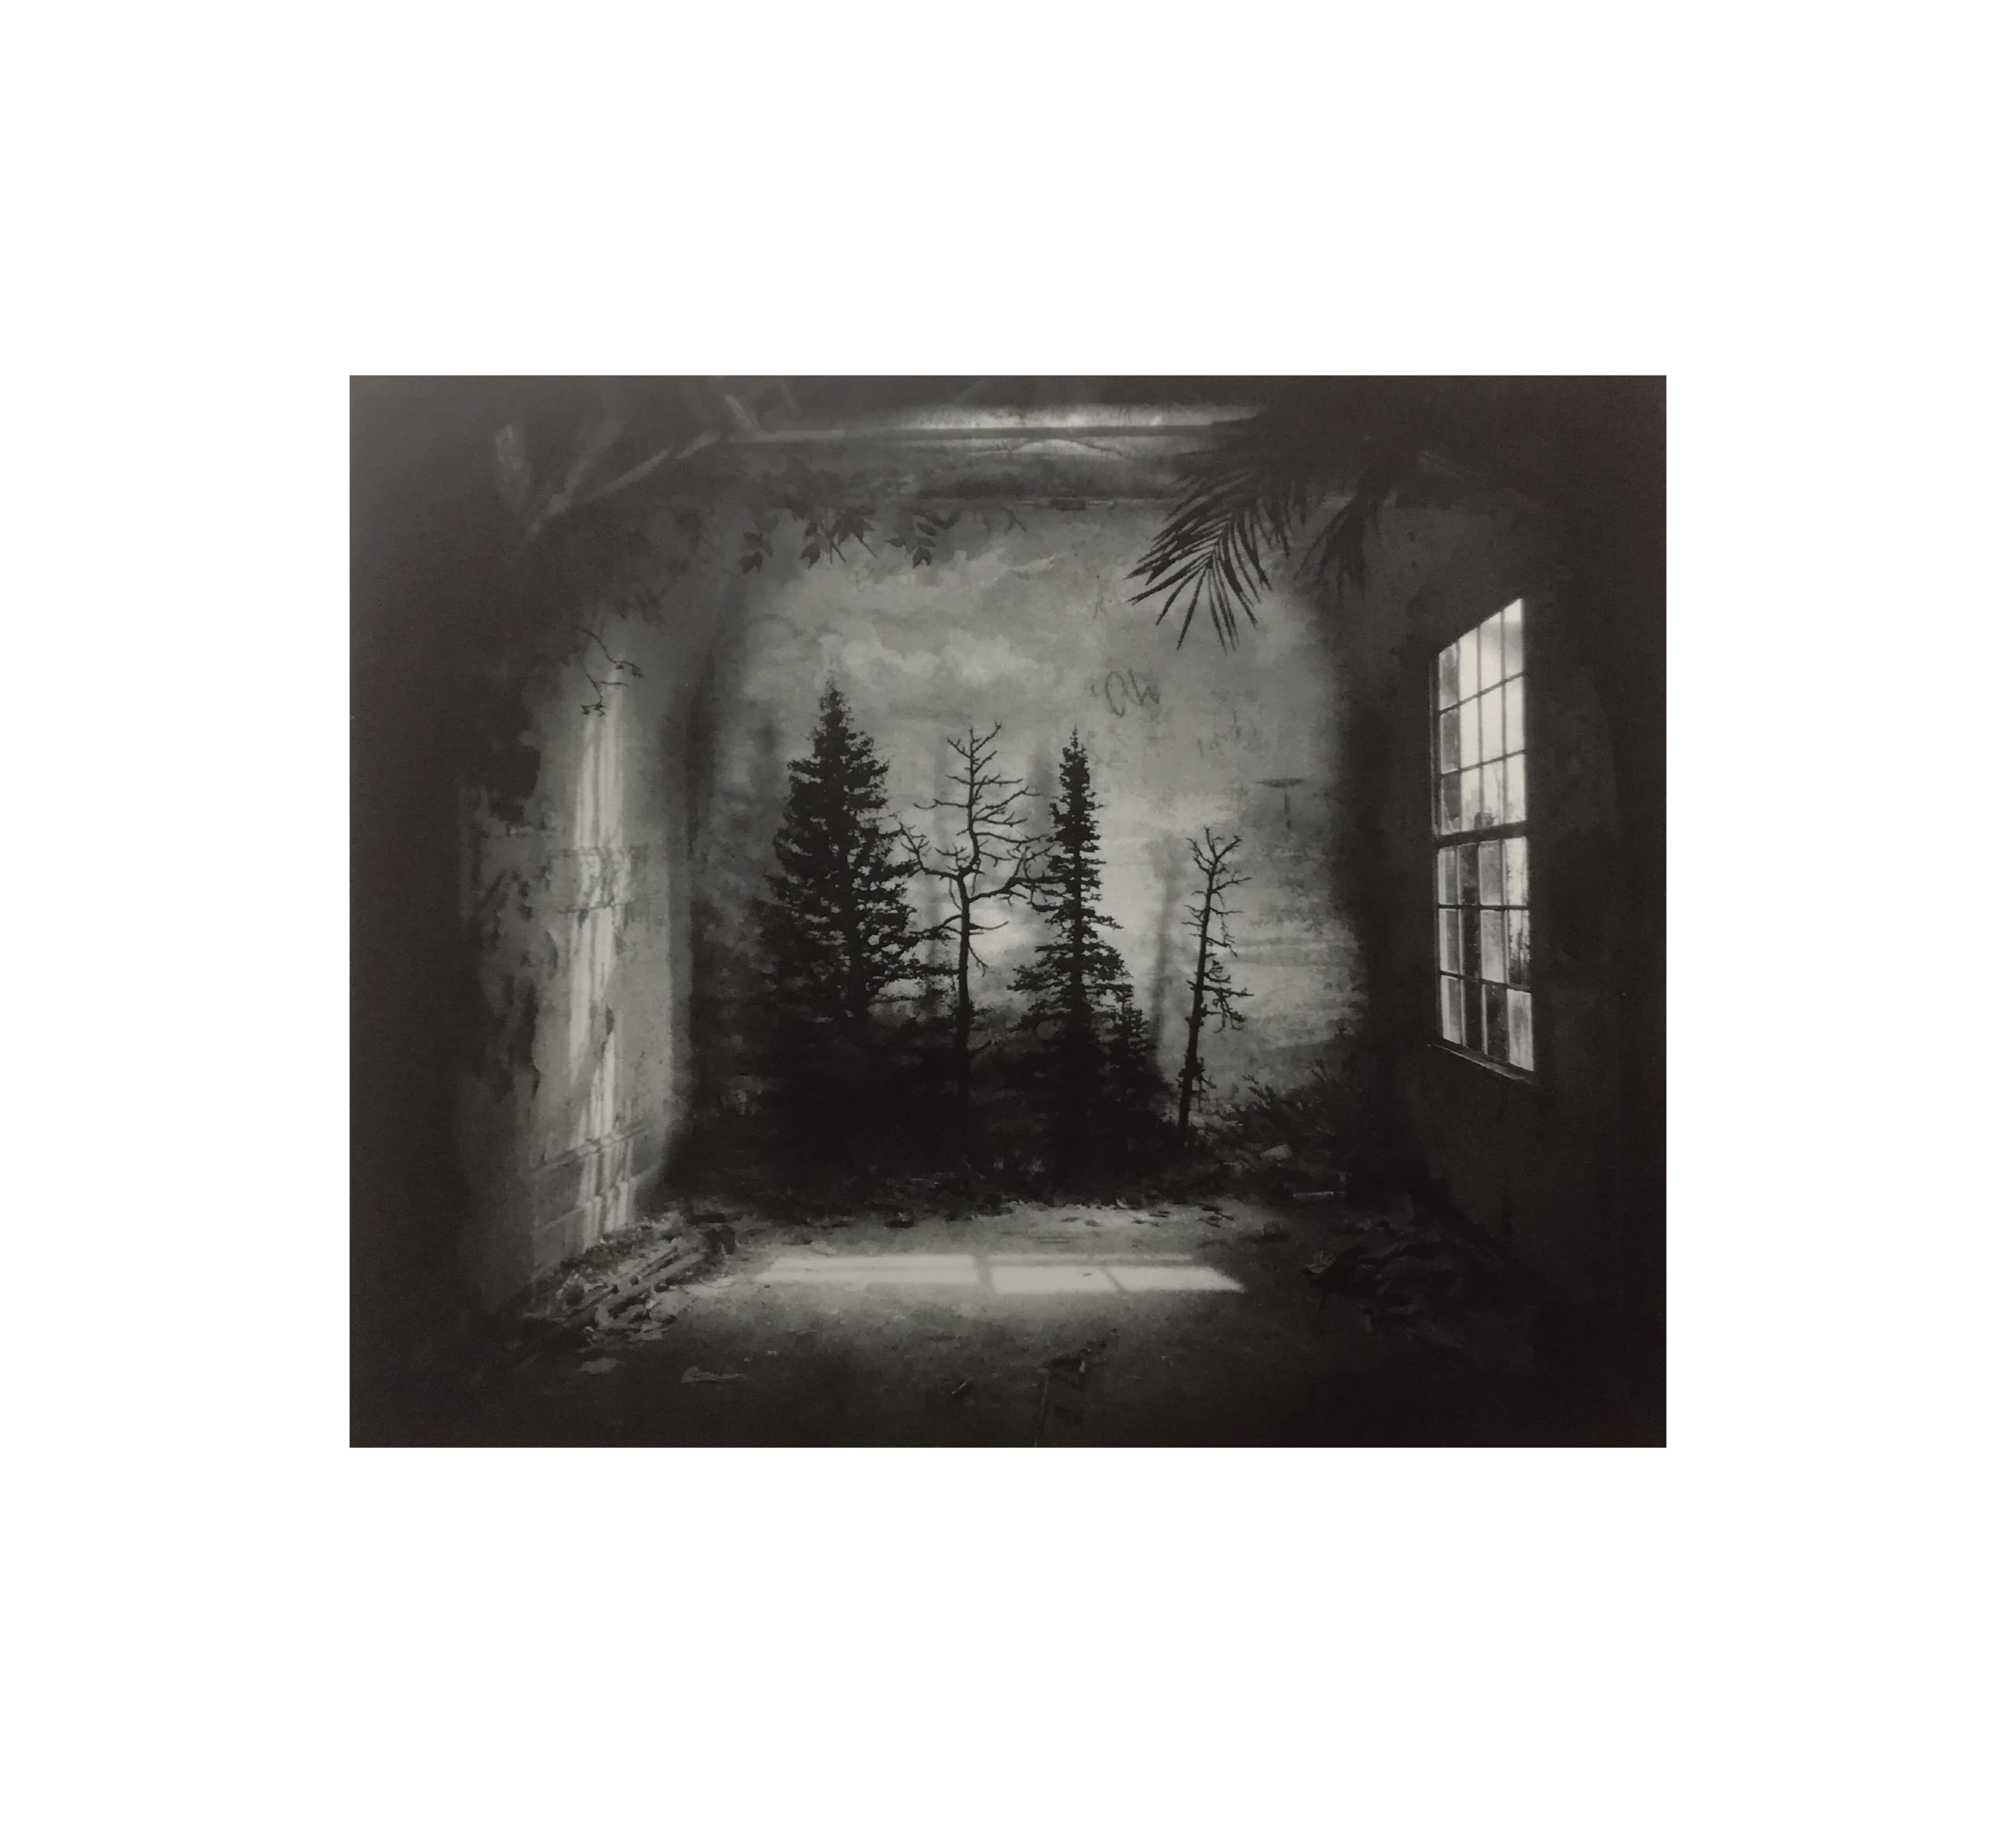 Room with Pines - Photogravure Etching Limited Edition By Suzanne Moxhay